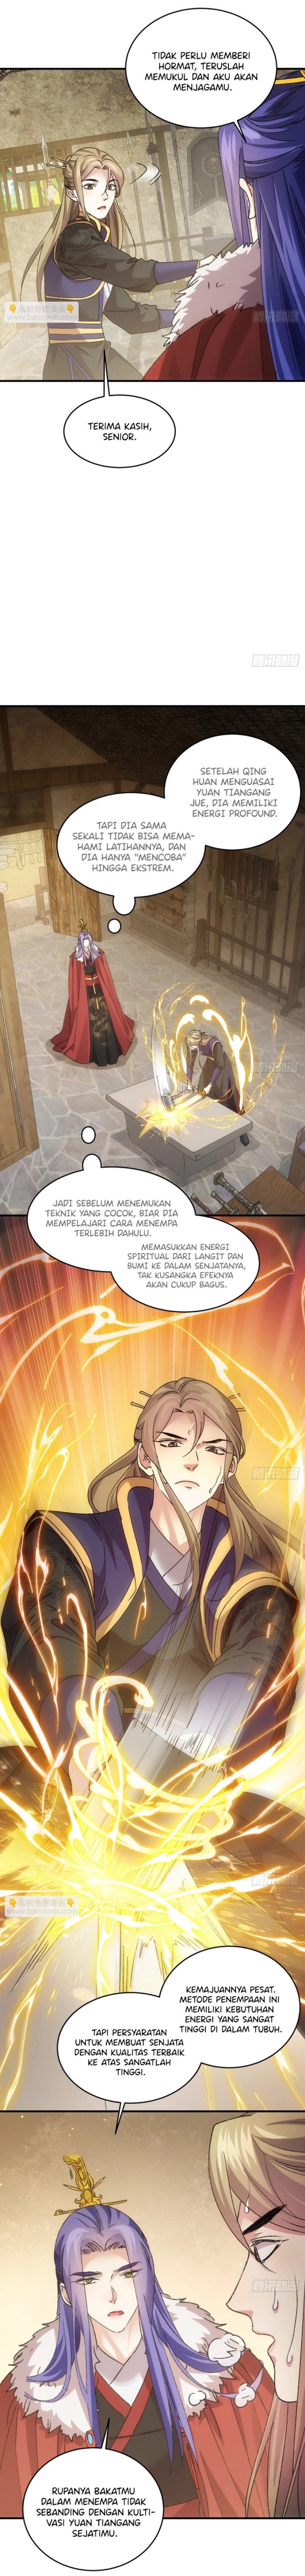 Dilarang COPAS - situs resmi www.mangacanblog.com - Komik i just dont play the card according to the routine 189 - chapter 189 190 Indonesia i just dont play the card according to the routine 189 - chapter 189 Terbaru 13|Baca Manga Komik Indonesia|Mangacan